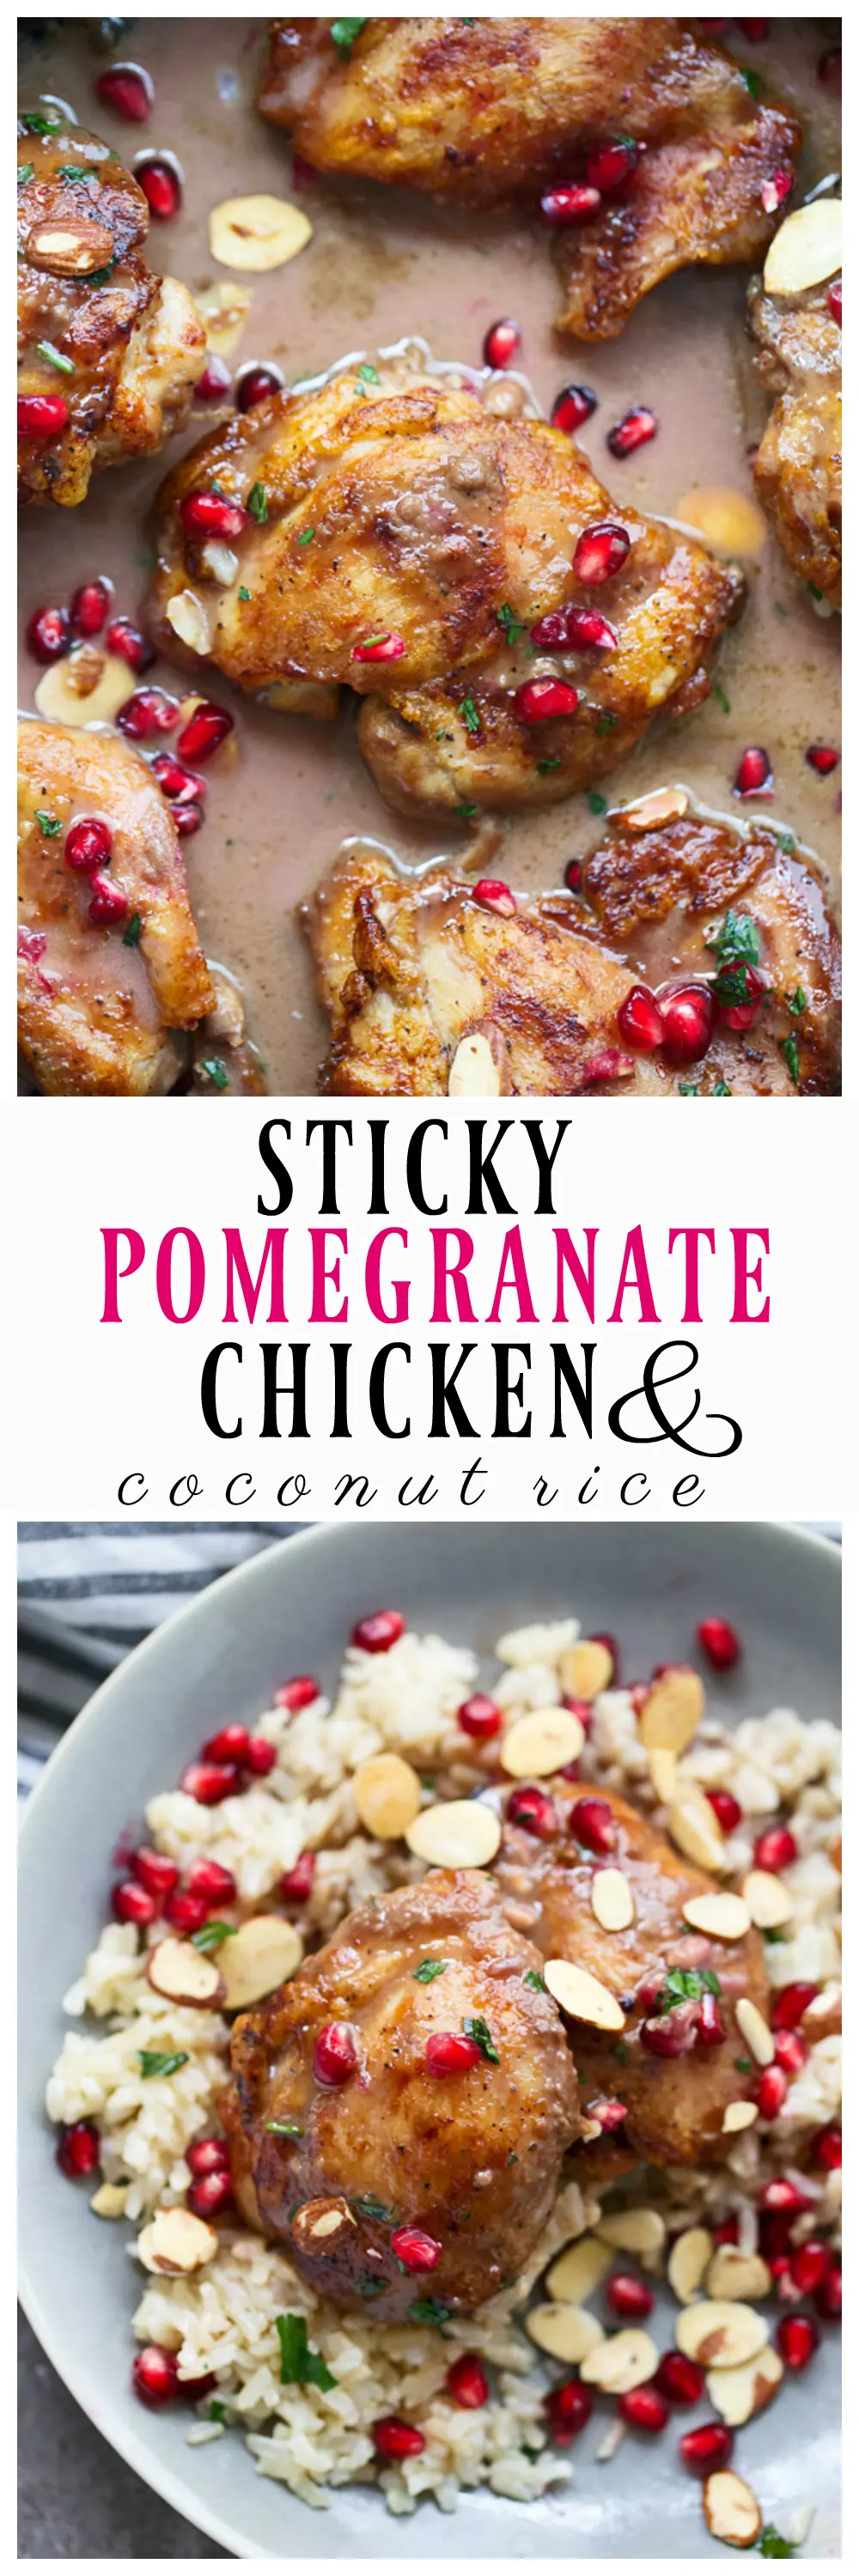 Sticky Pomegranate Chicken with Coconut Rice